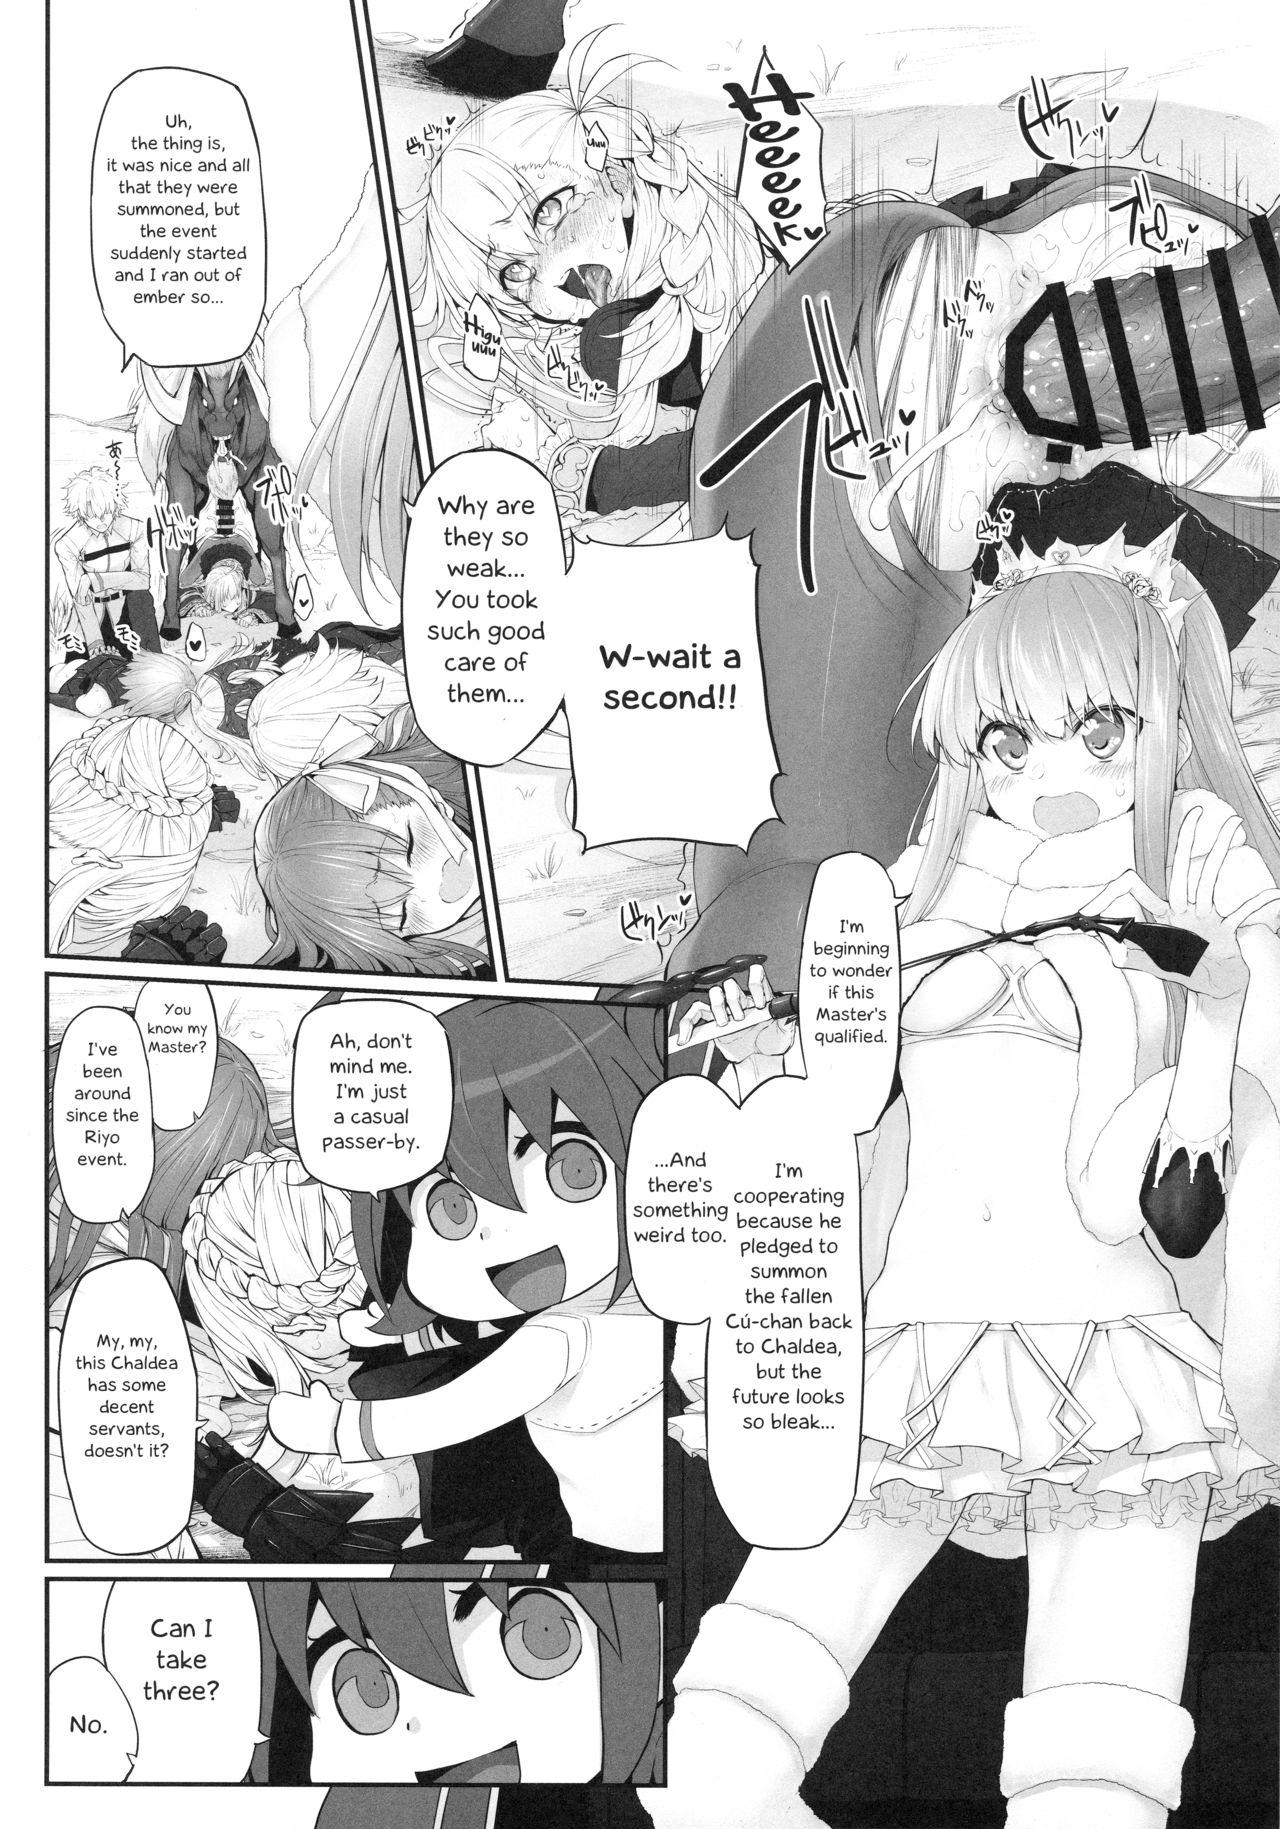 Full Movie Marked Girls Vol. 16 - Fate grand order Abuse - Page 3